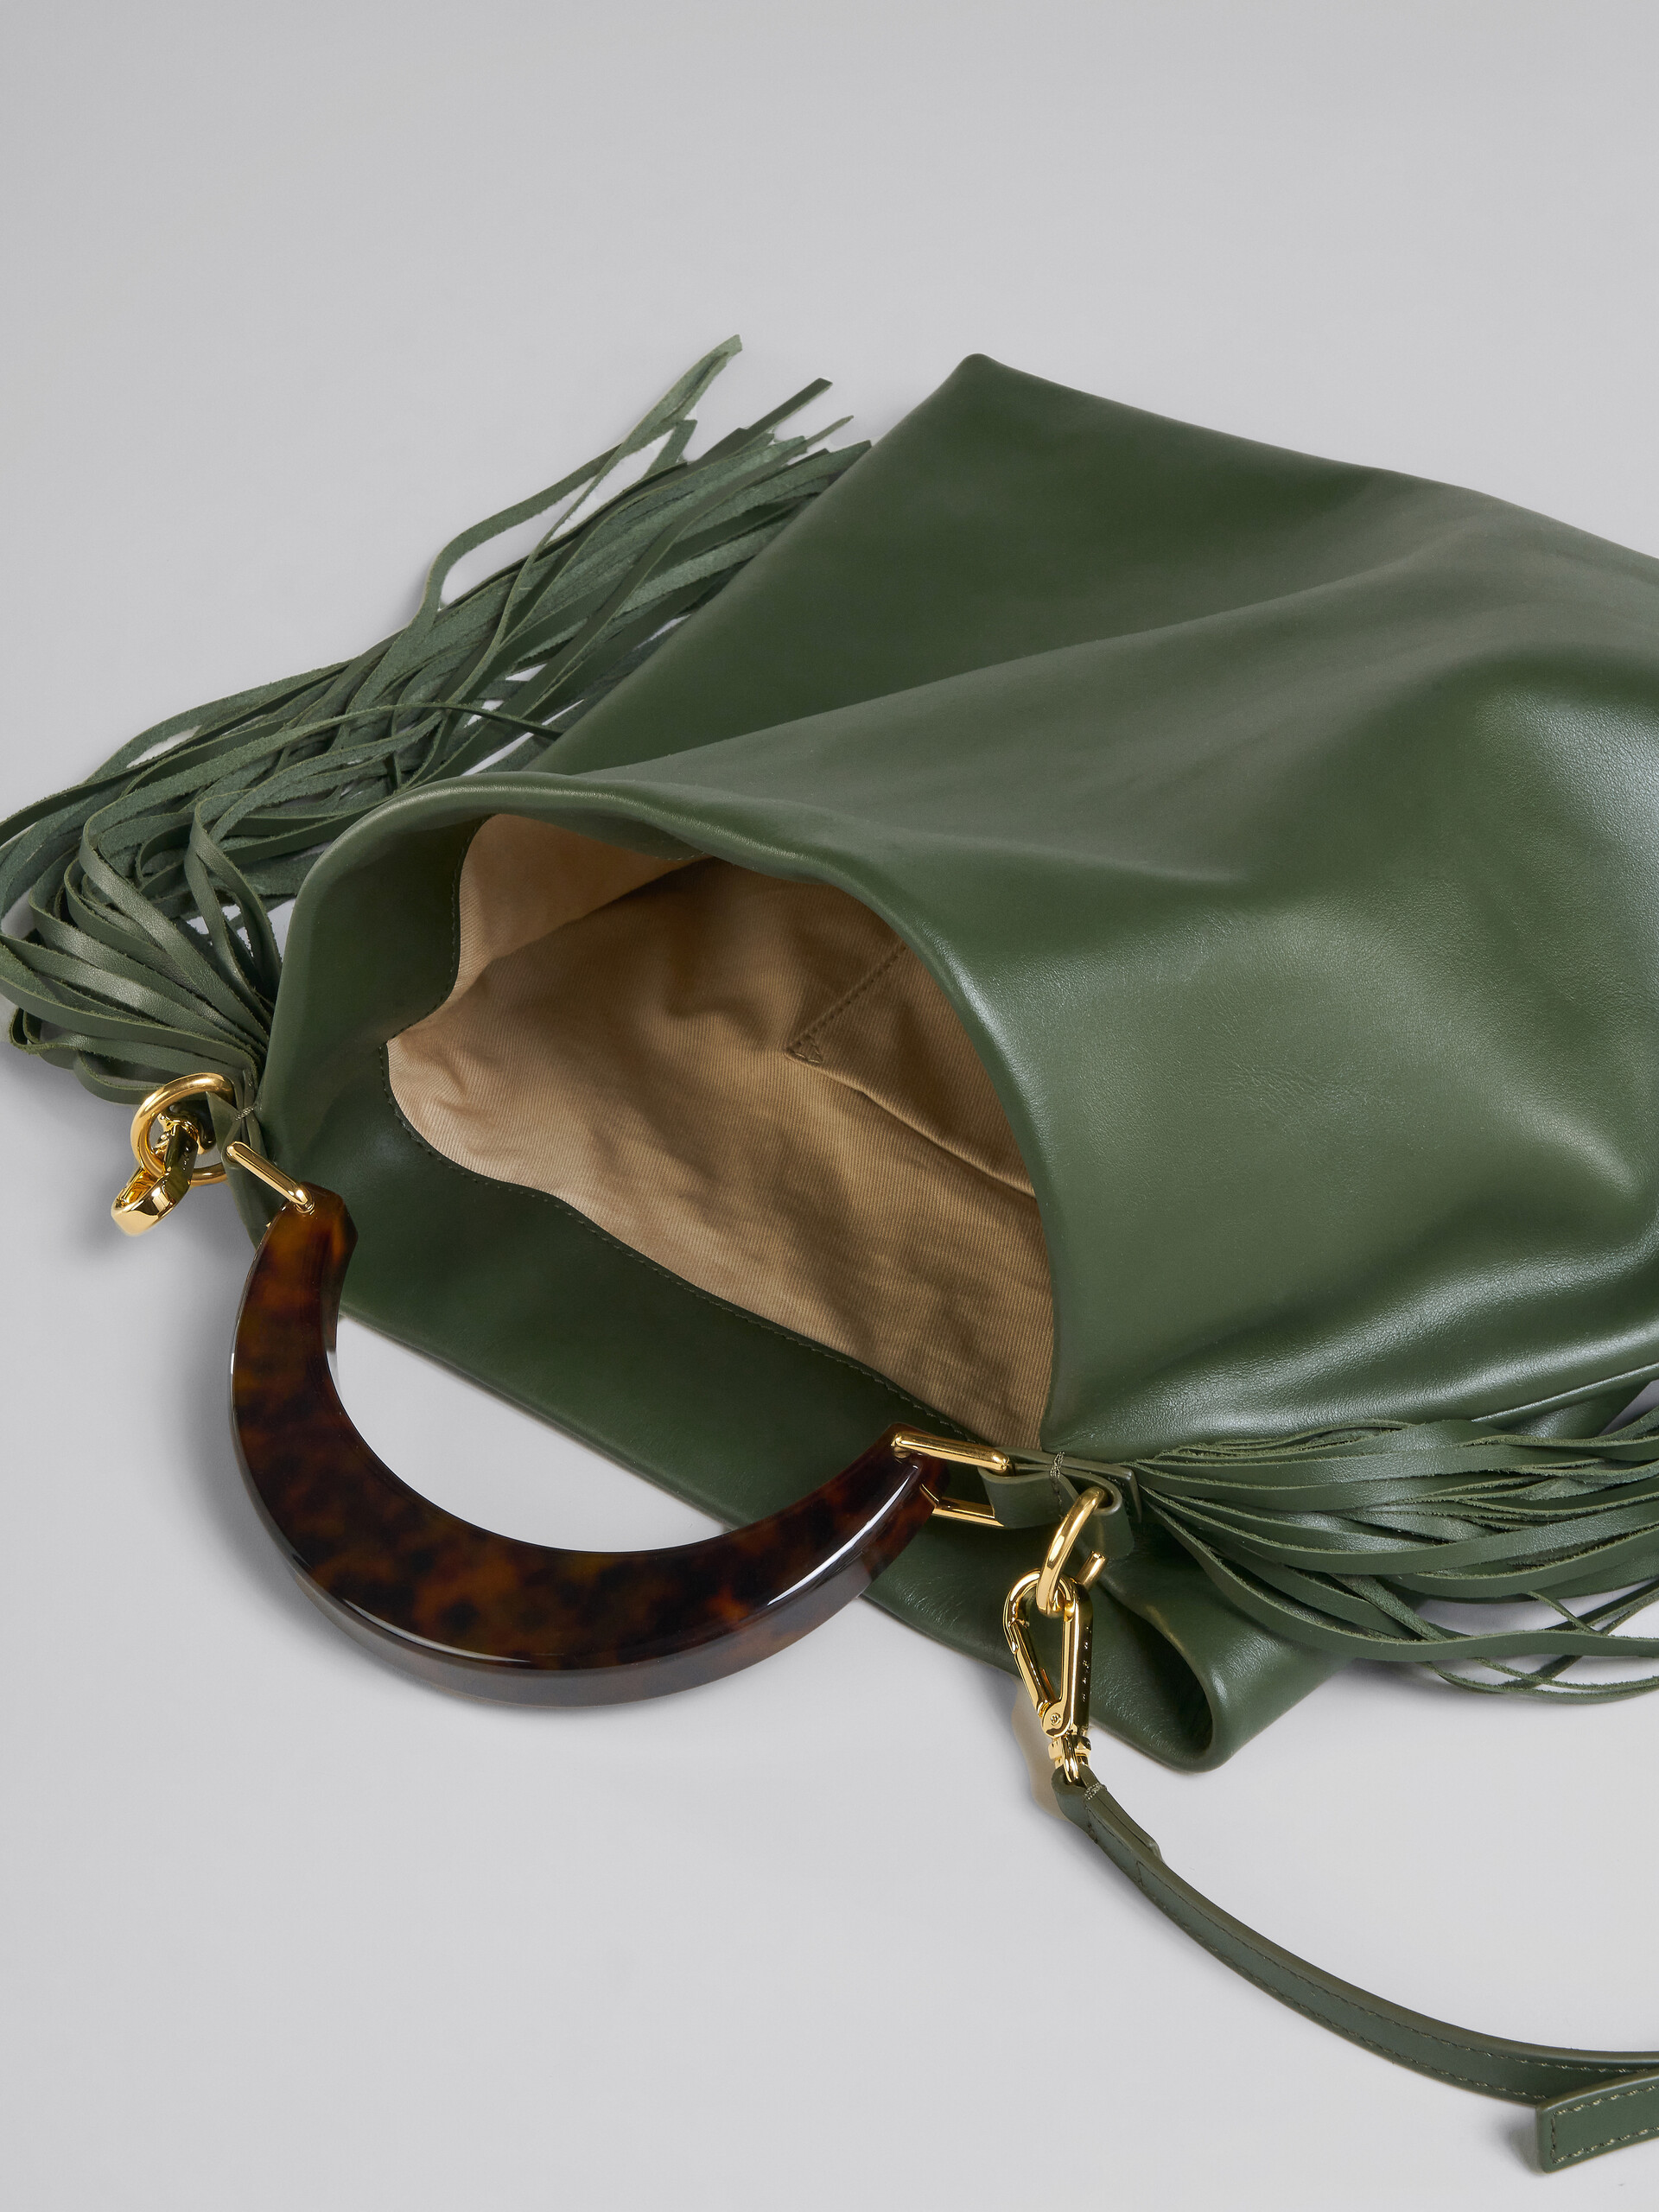 Venice Medium Bag in green leather with fringes - Shoulder Bags - Image 4